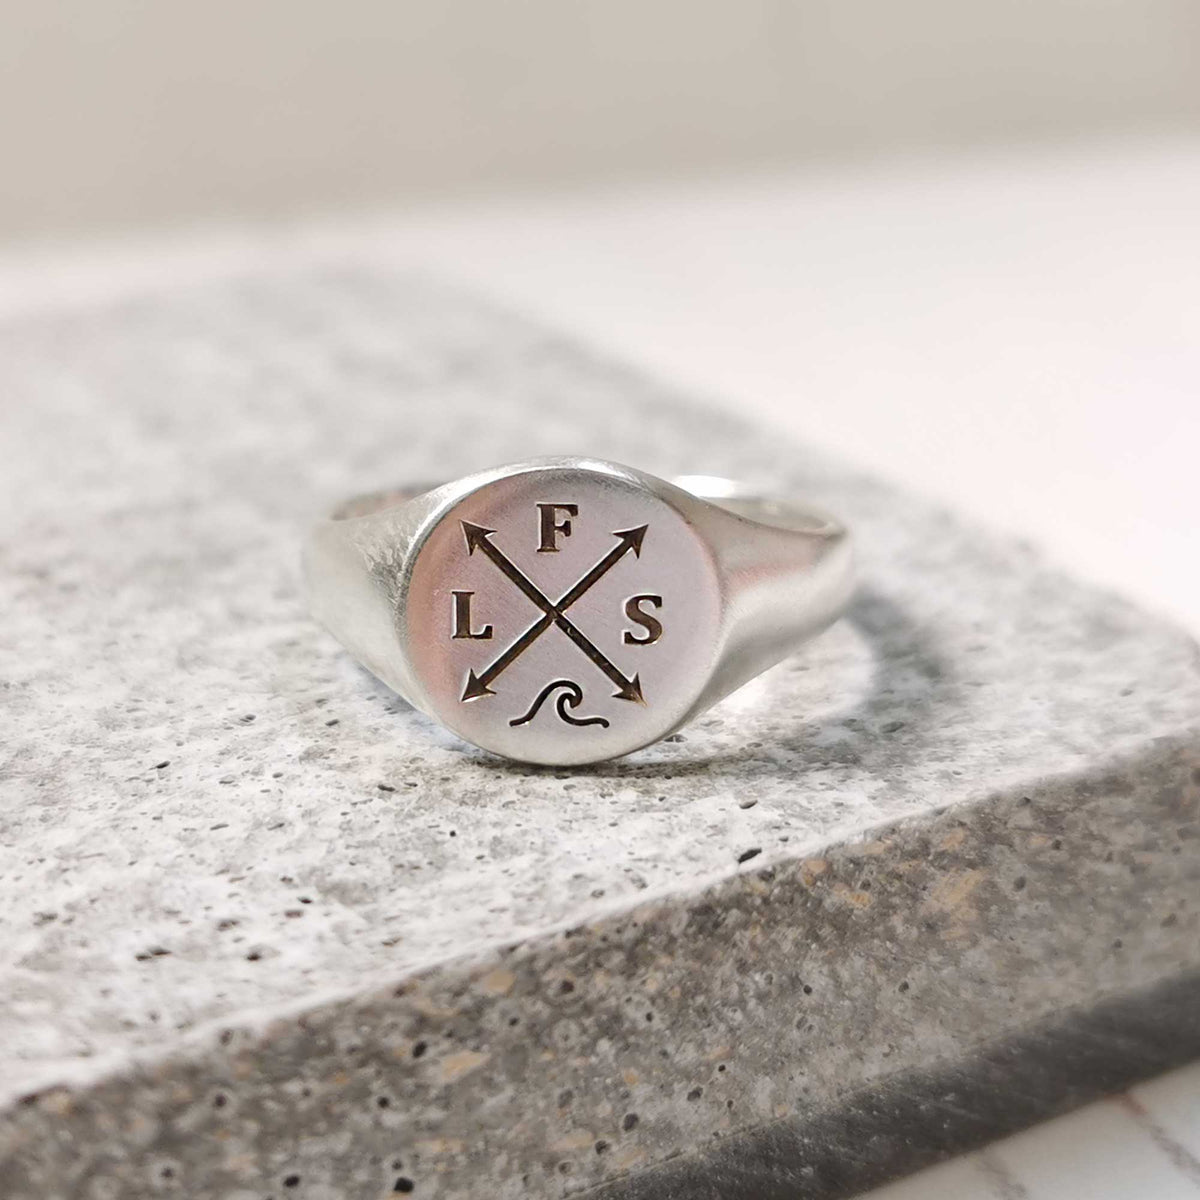 wave symbol initials silver signet ring